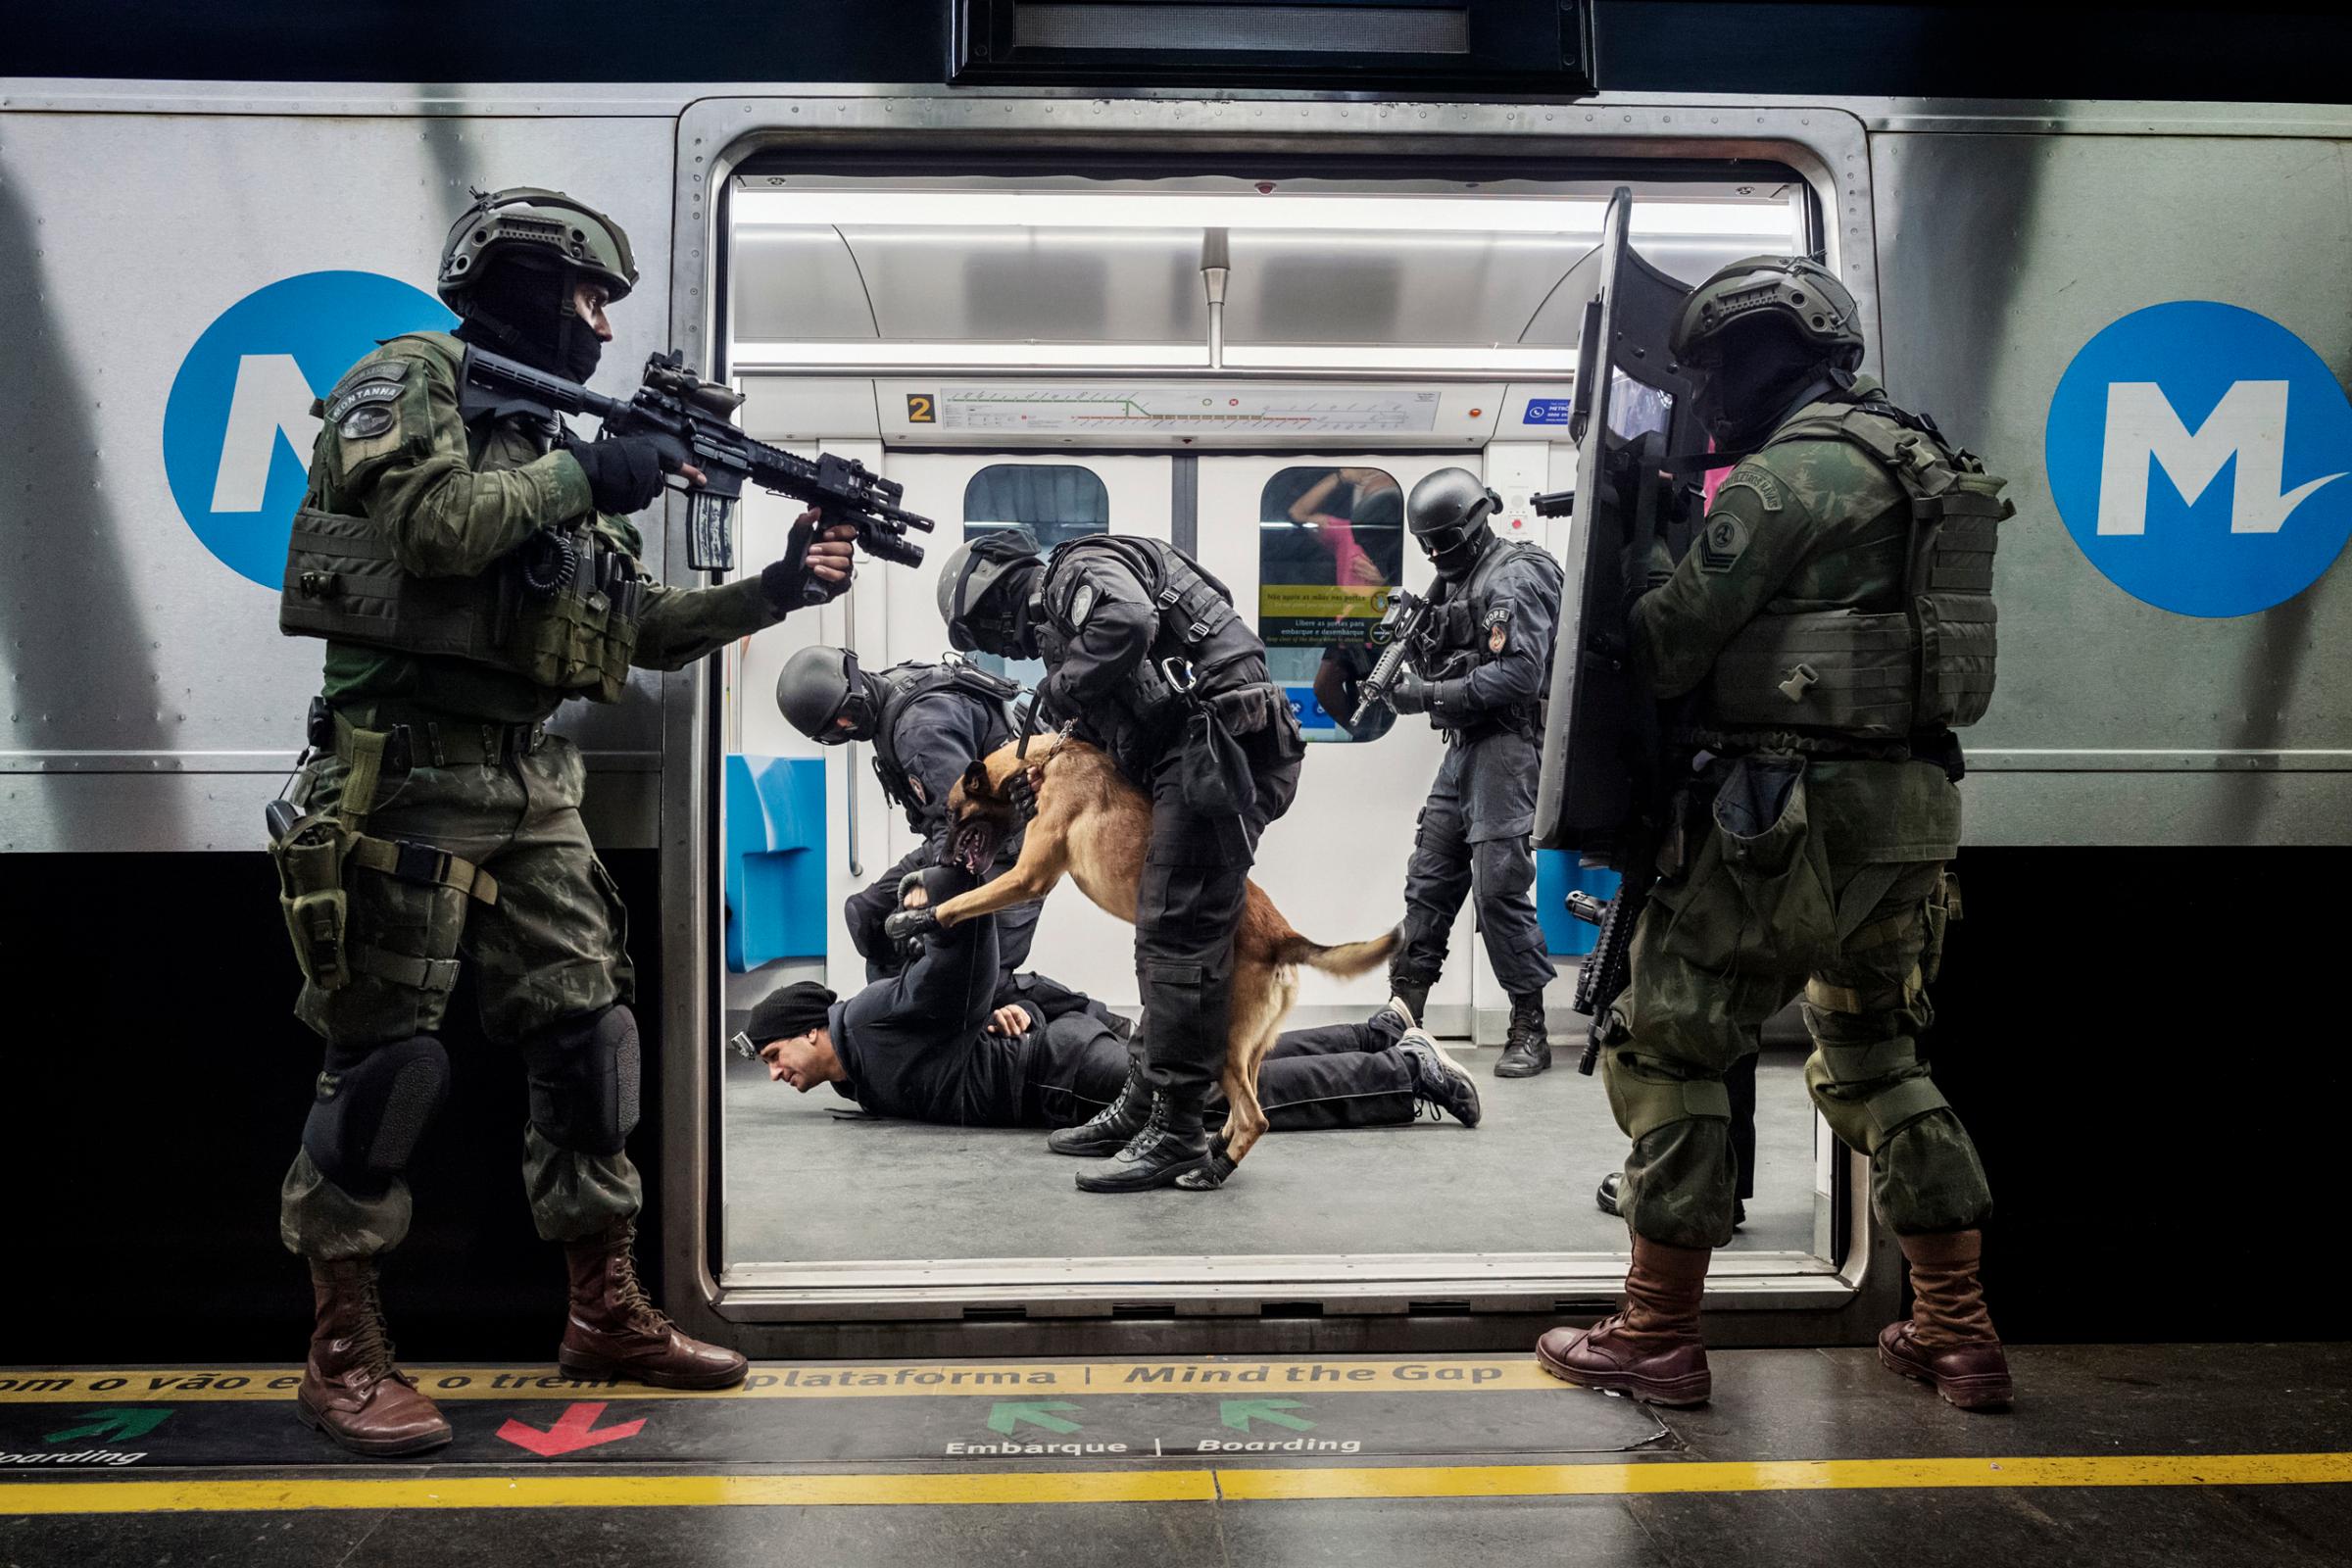 Anti-terrorism exercise in tubular structures (metro, trains,É) by members of BOPE (Battalion of Special Police Operations) in a subway train at Estaao station in Rio de Janeiro. The BOPE members have been trained by members of the French RAID.